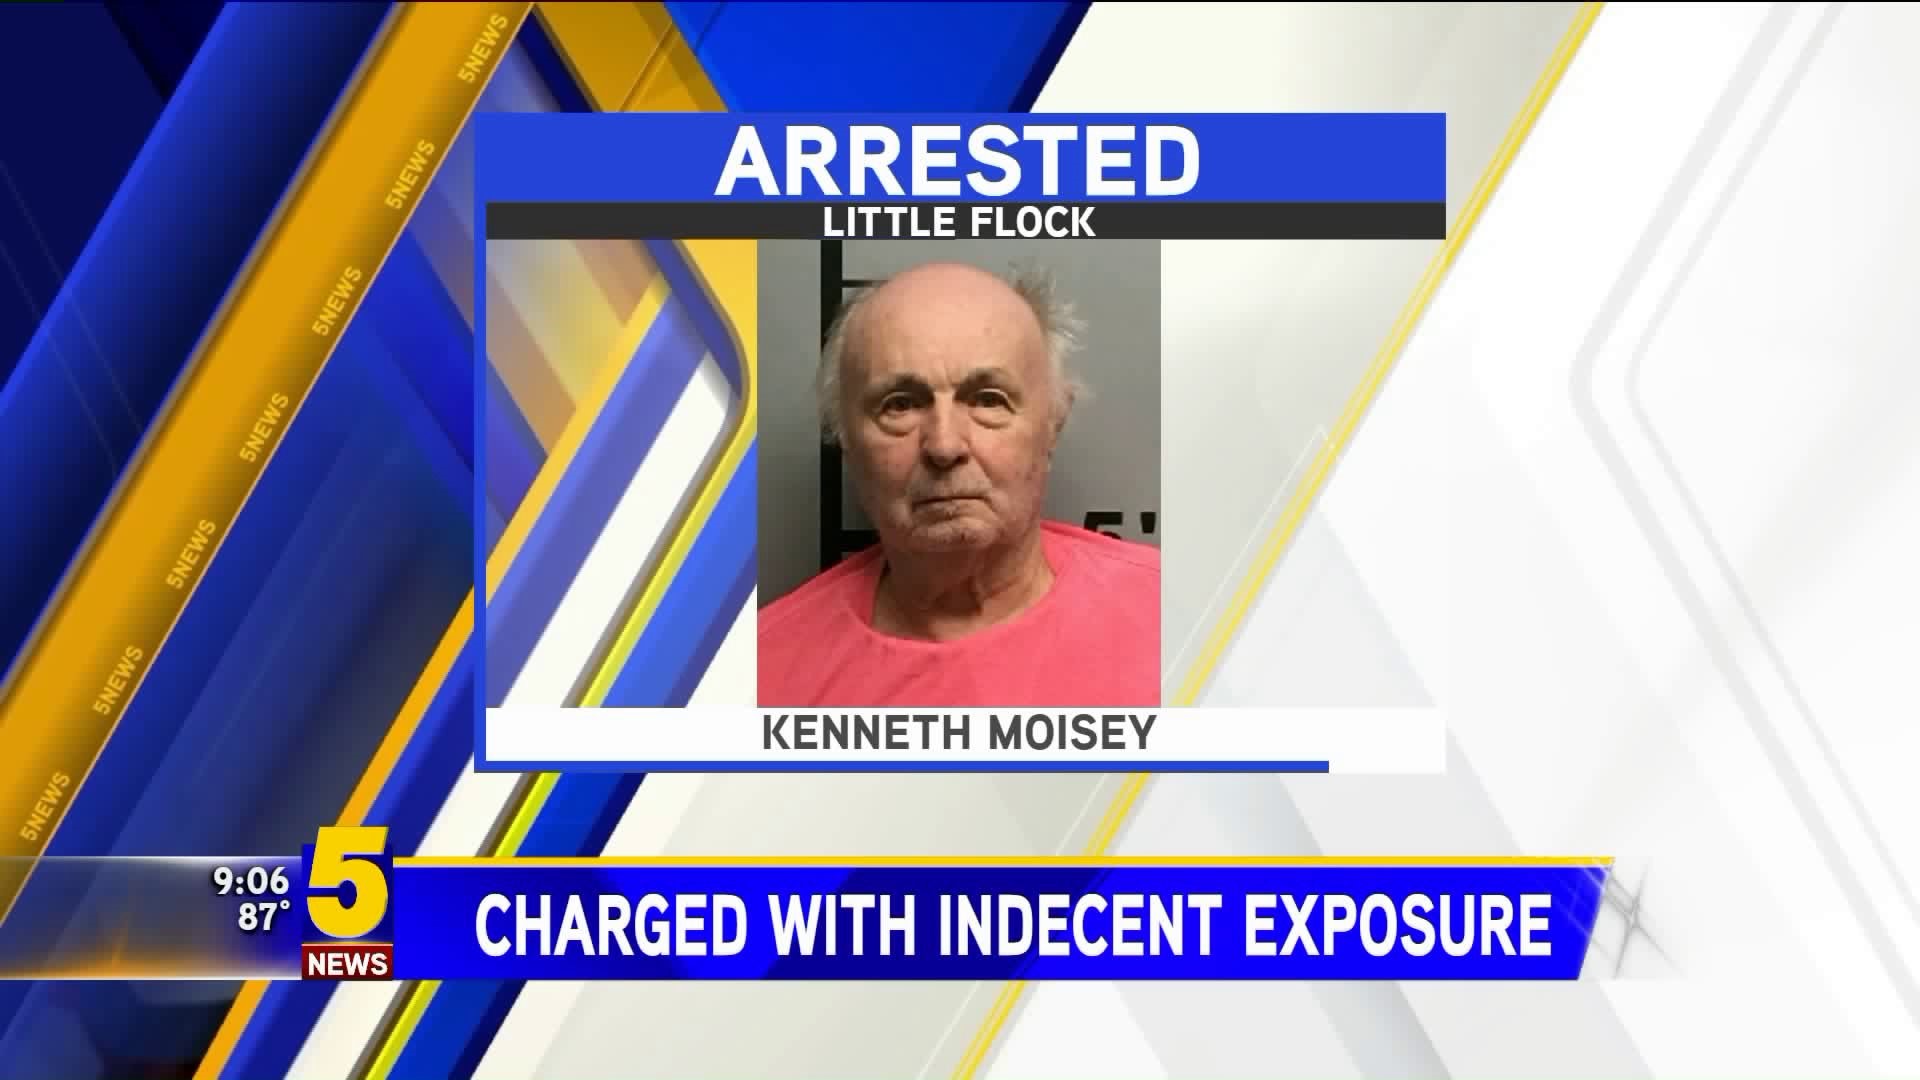 Little Flock Man Charged With Indecent Exposure